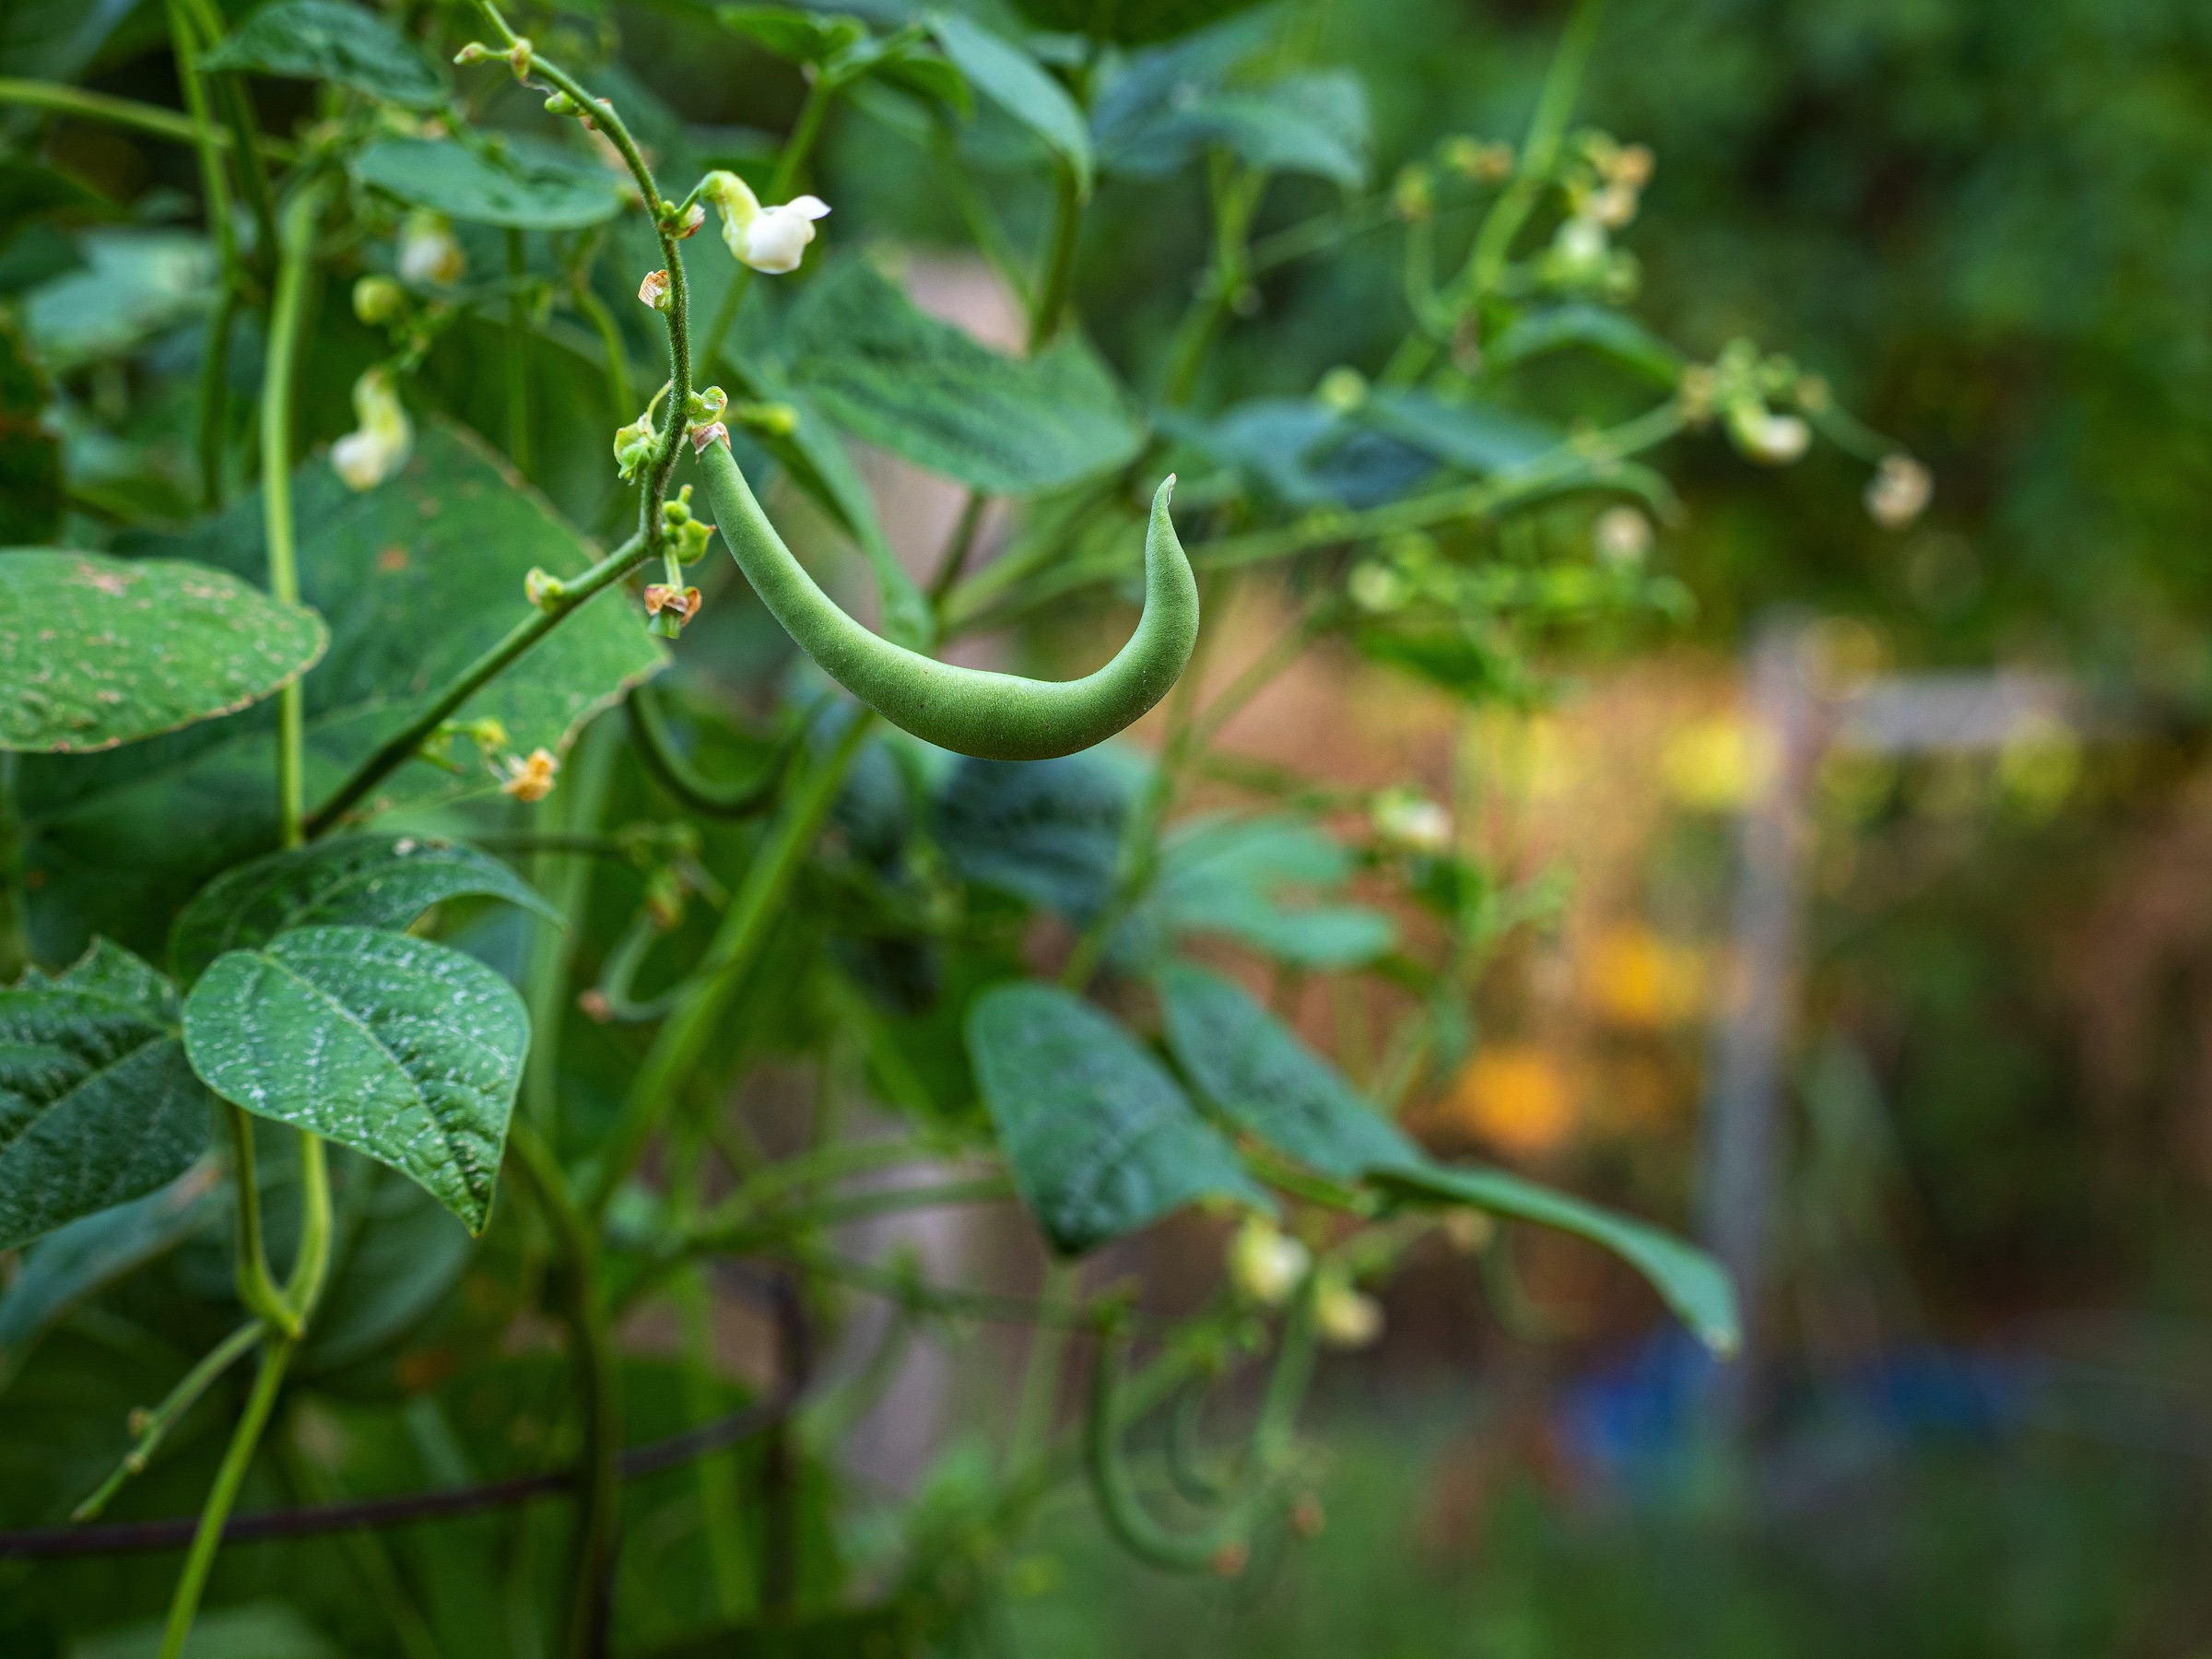 photo of a green bean on the vine